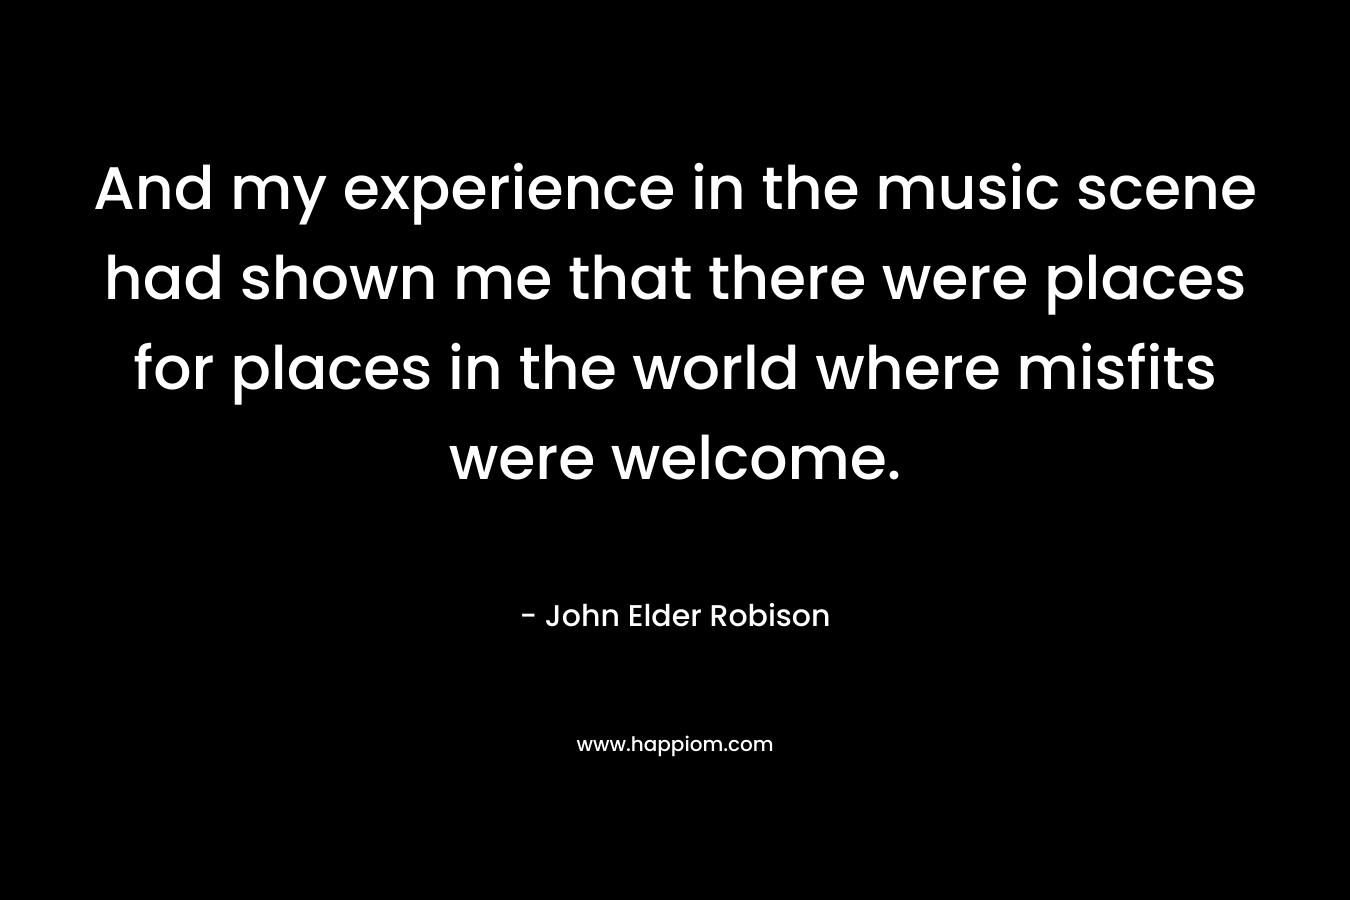 And my experience in the music scene had shown me that there were places for places in the world where misfits were welcome. – John Elder Robison